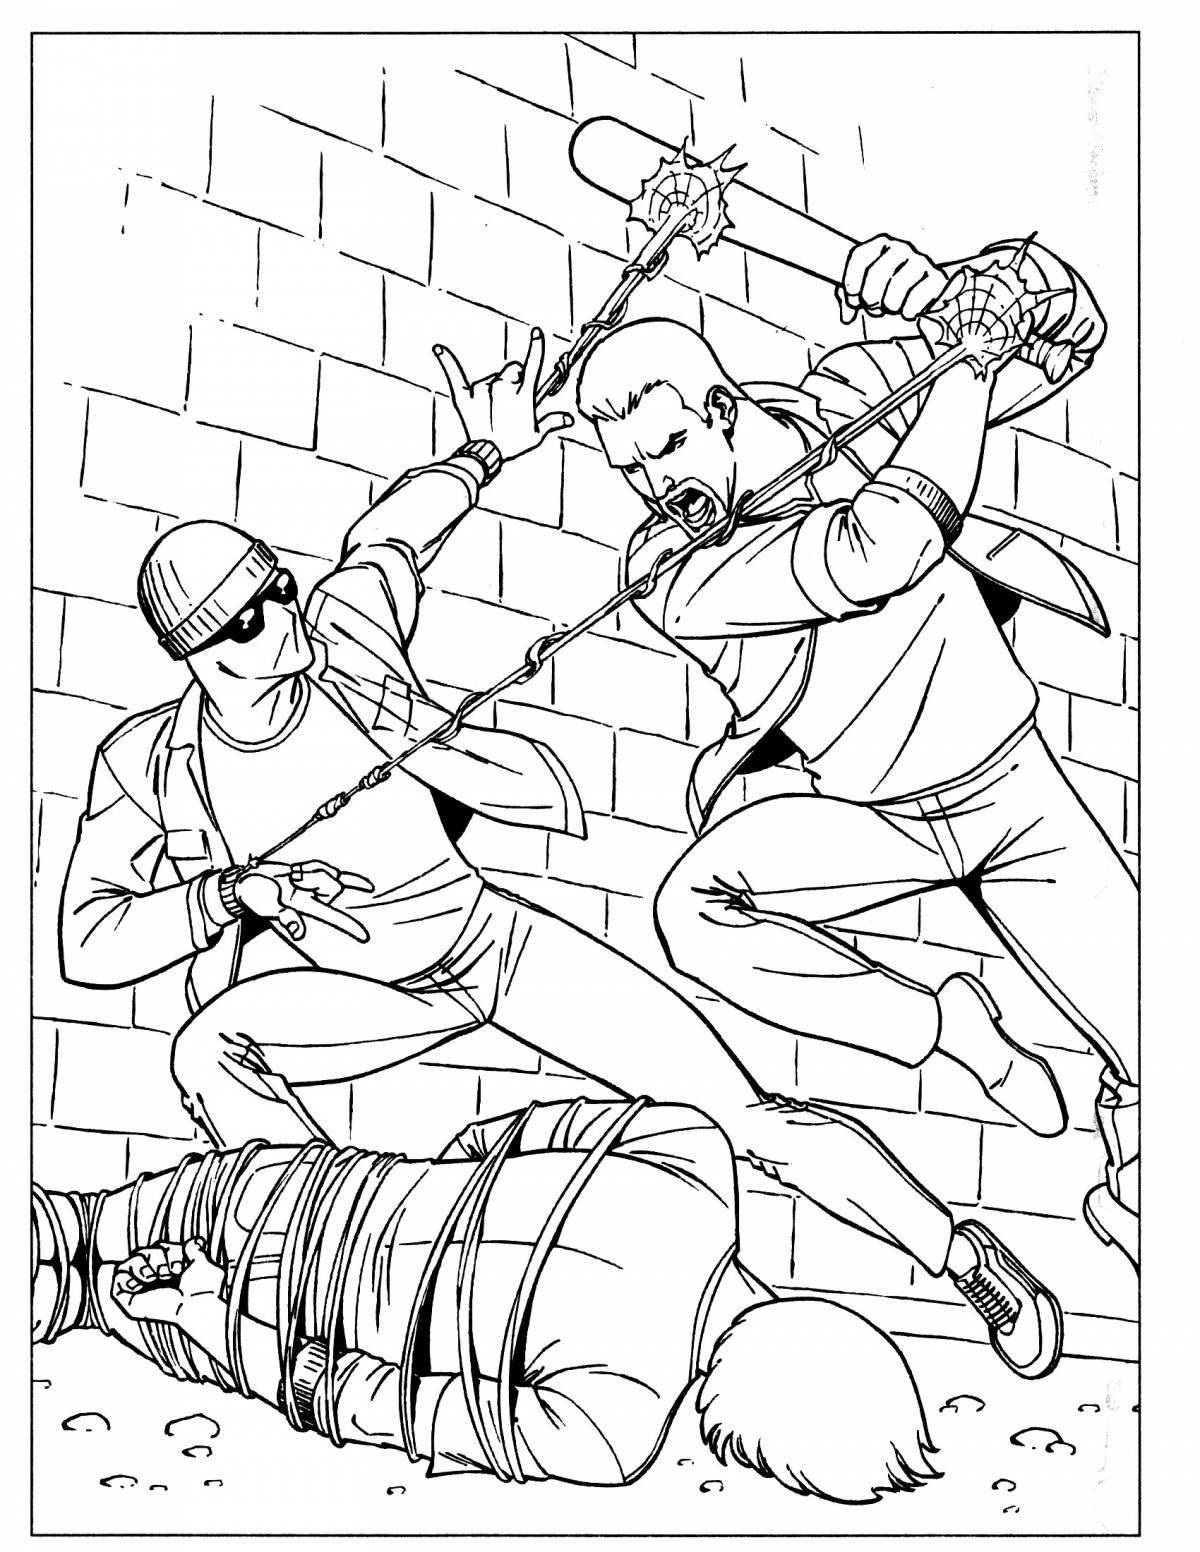 Exciting bank robbery coloring book